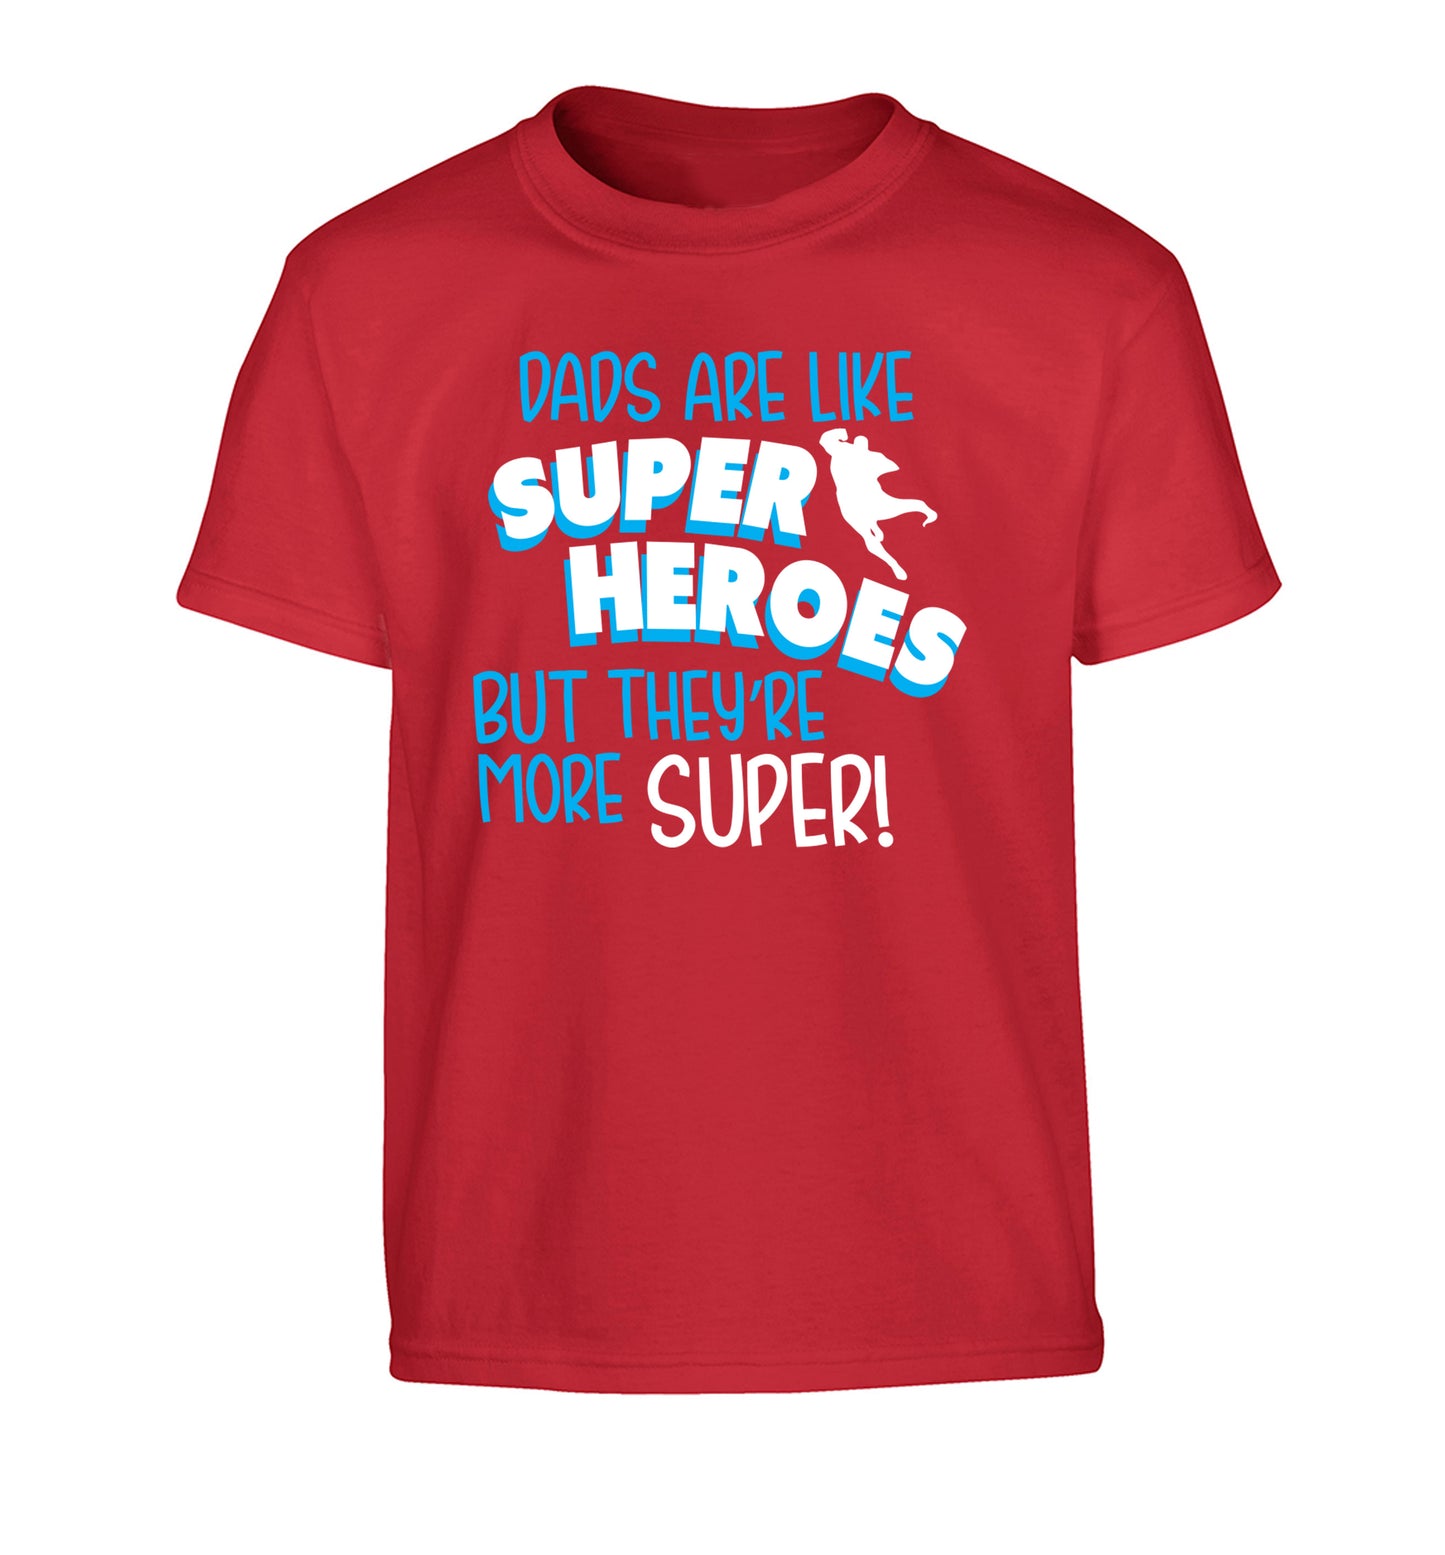 Dads are like superheros but they're more super Children's red Tshirt 12-13 Years